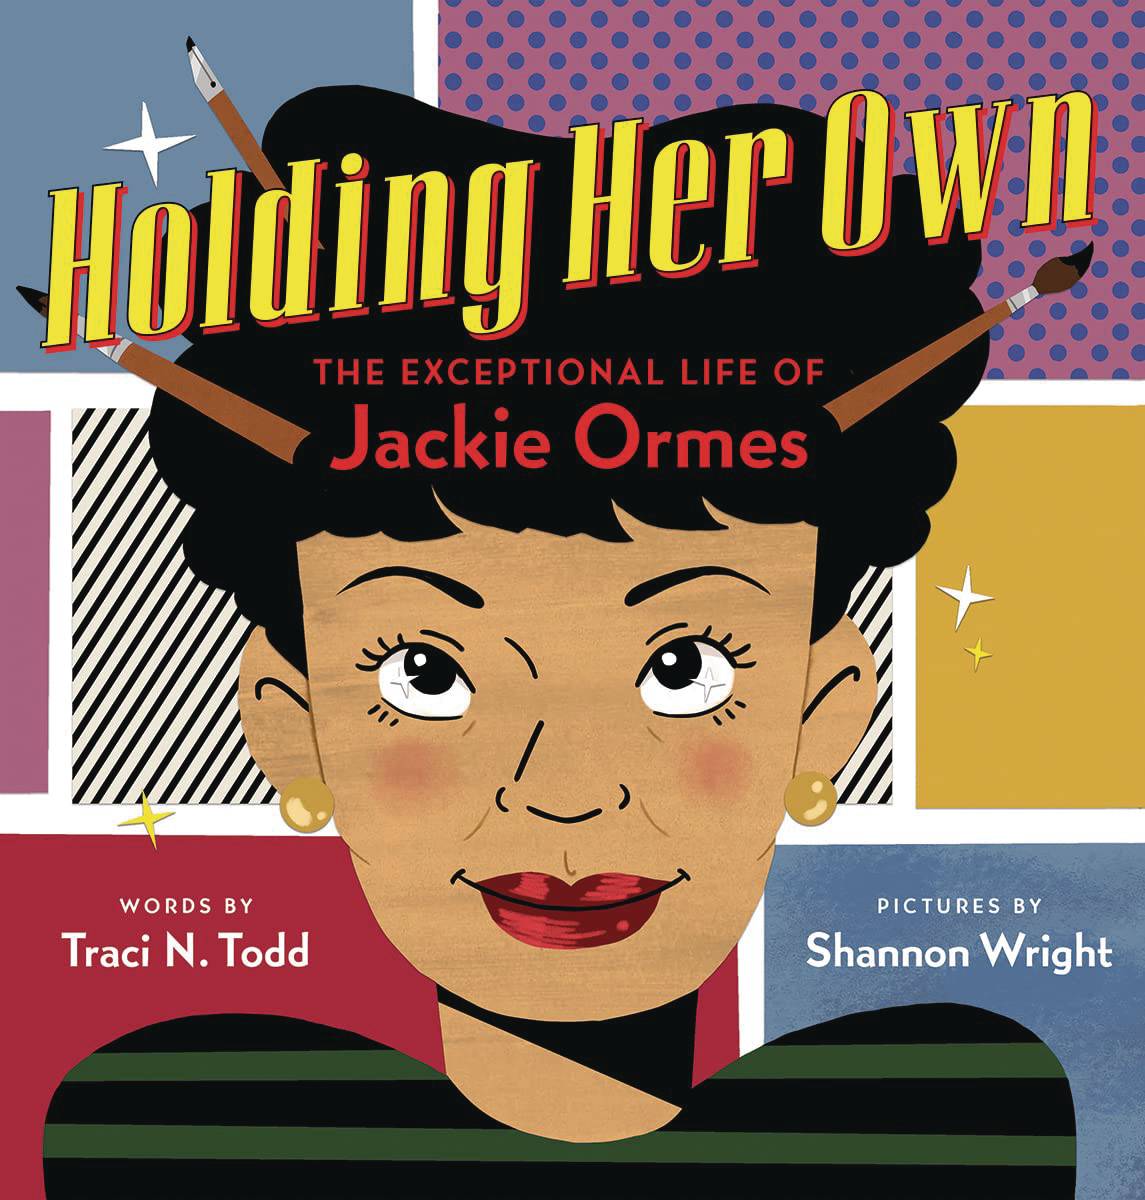 The One Stop Shop Comics & Games Holding Her Own Exceptional Life Of Jackie Ormes Hc (C: 0-1- (01/04/2023) ORCHARD BOOKS